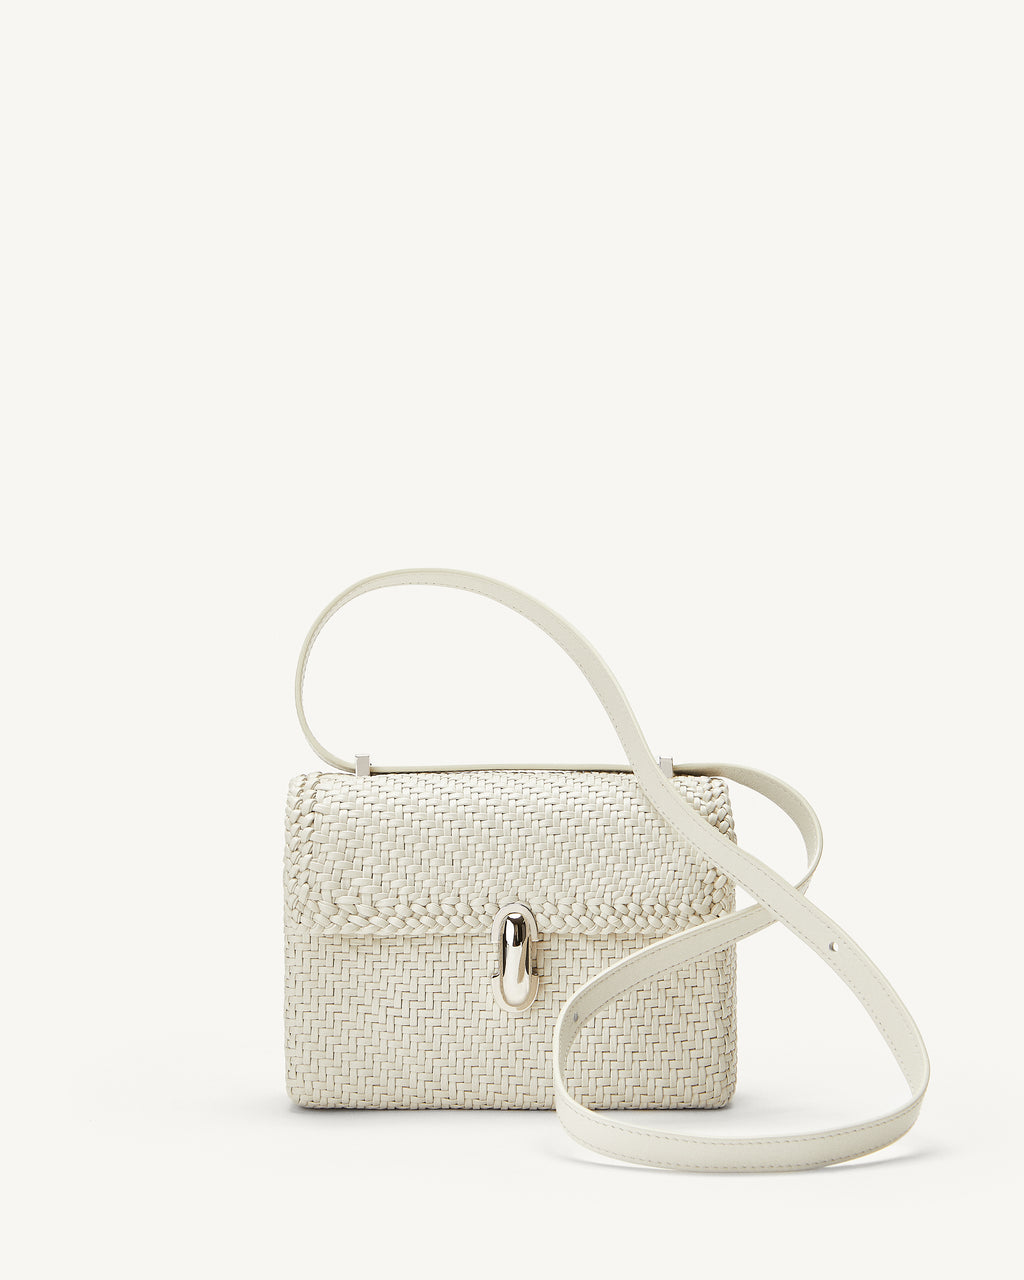 Symmetry 19 in Ivory Woven Leather